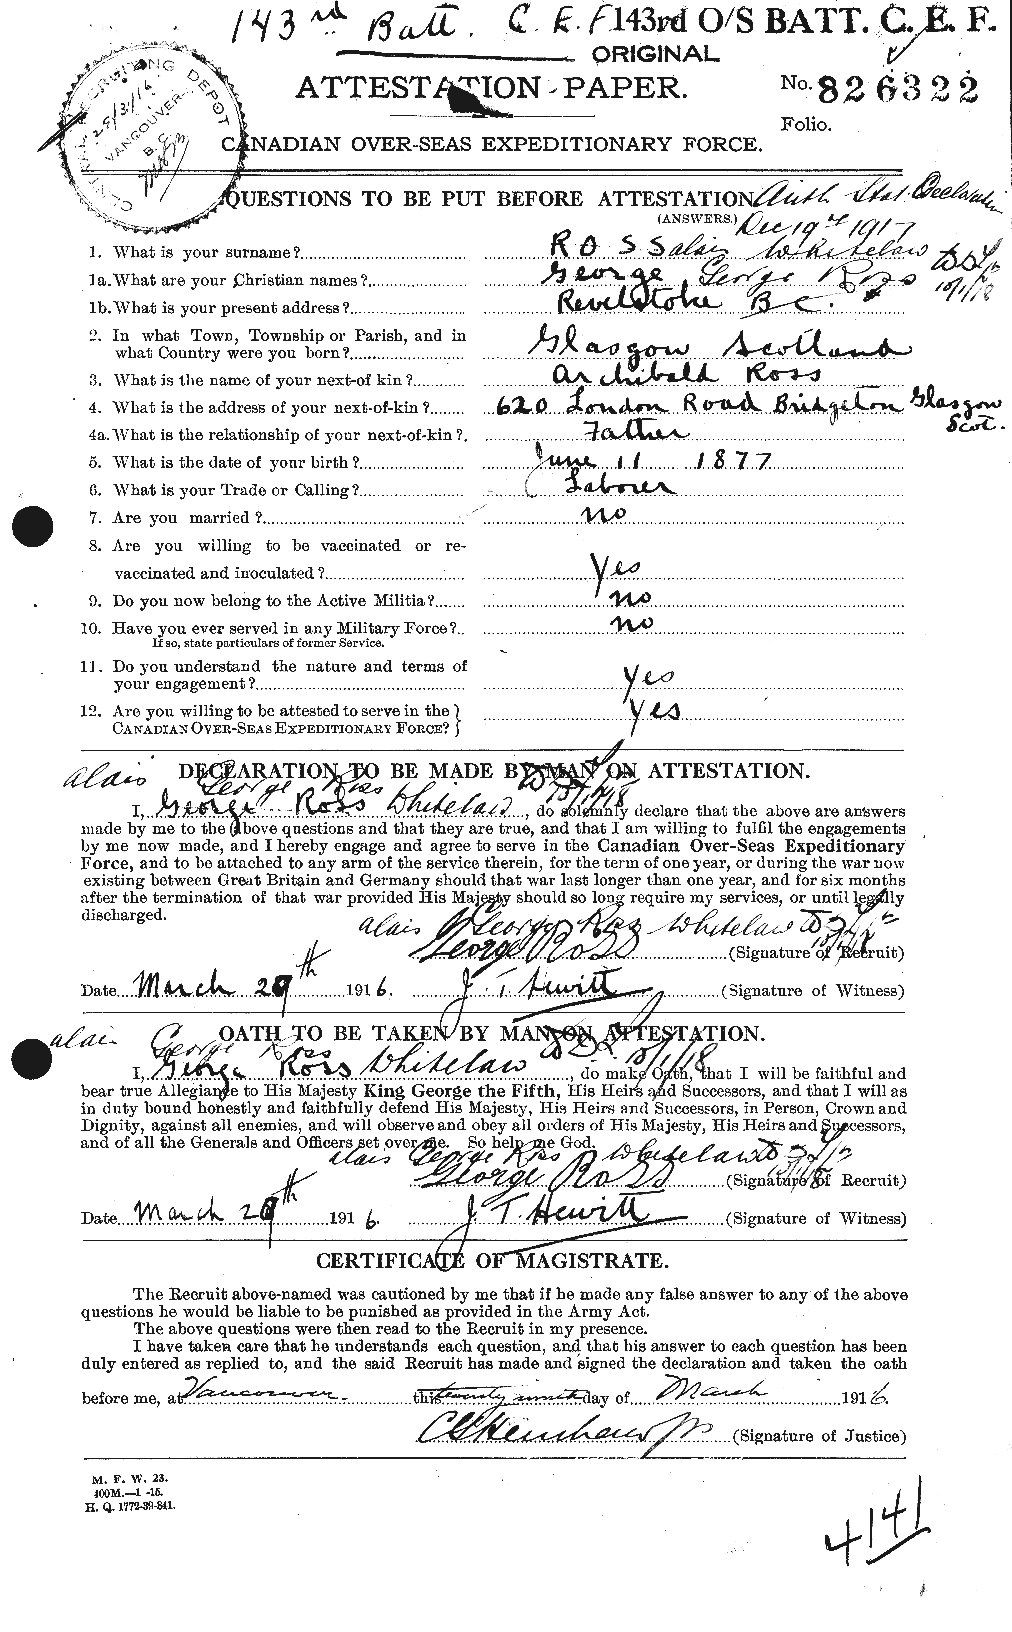 Personnel Records of the First World War - CEF 671119a